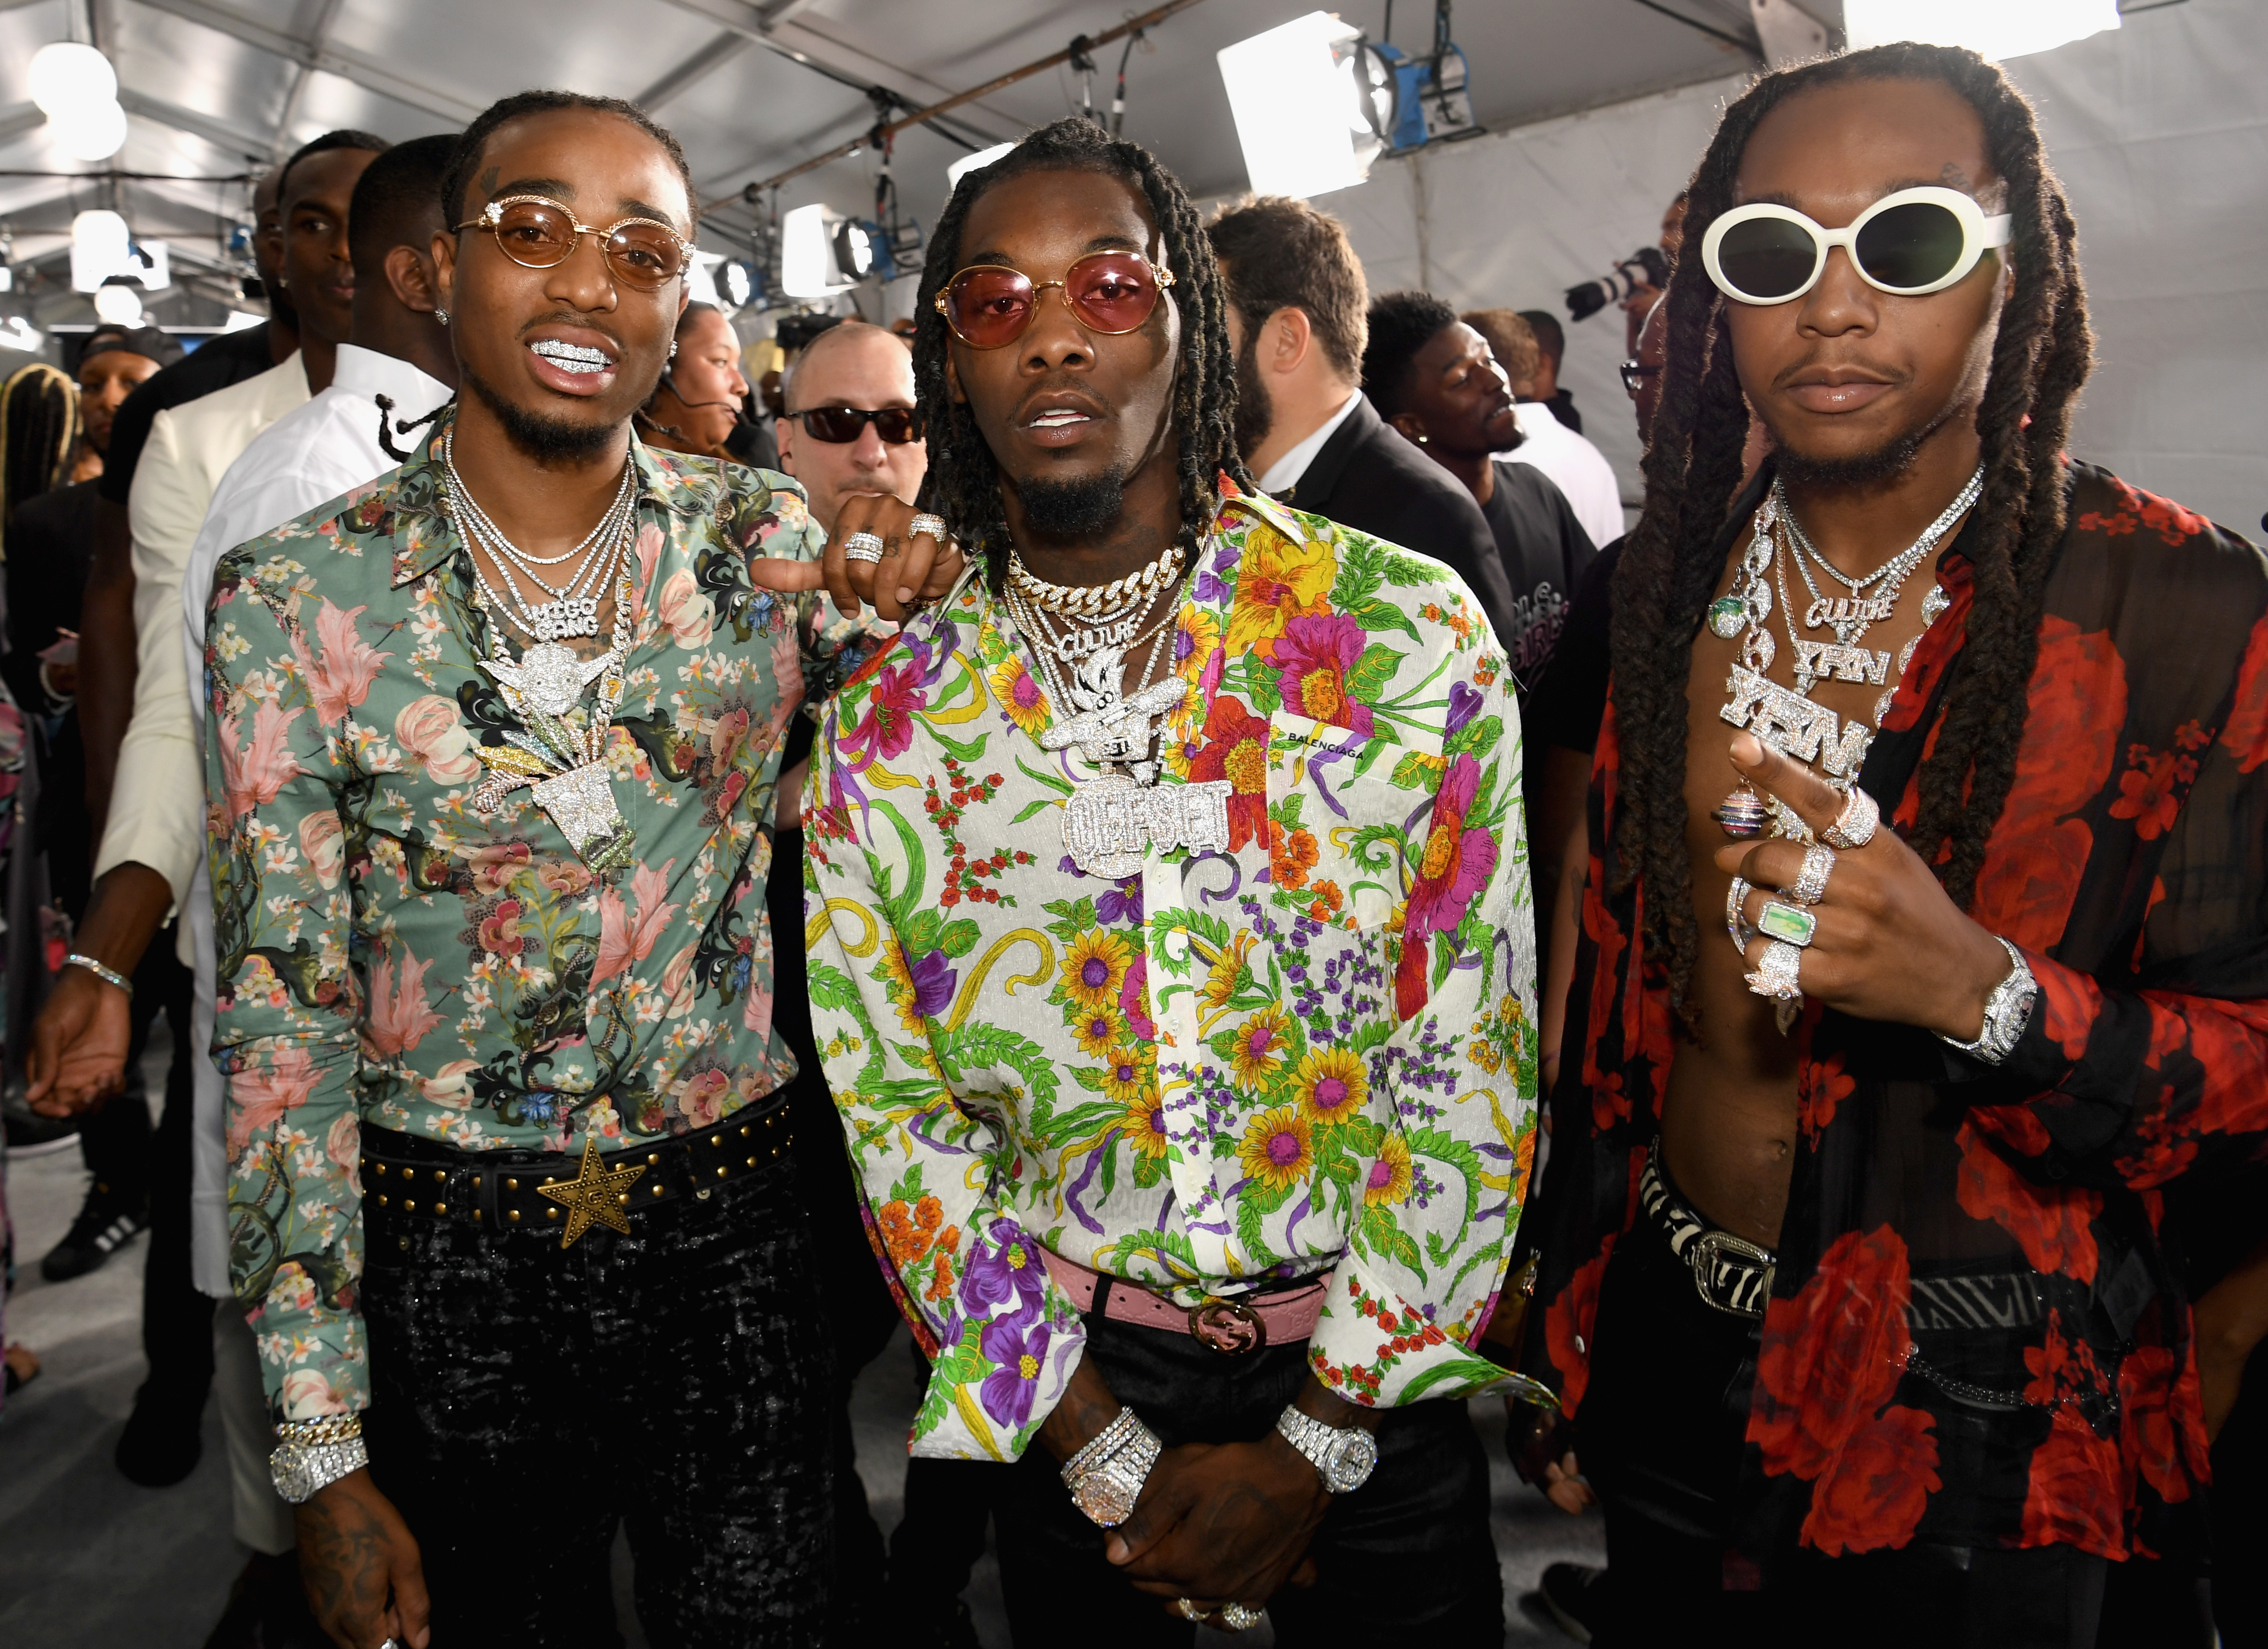 Migos Return With 'Straightenin,' First Song of 2021